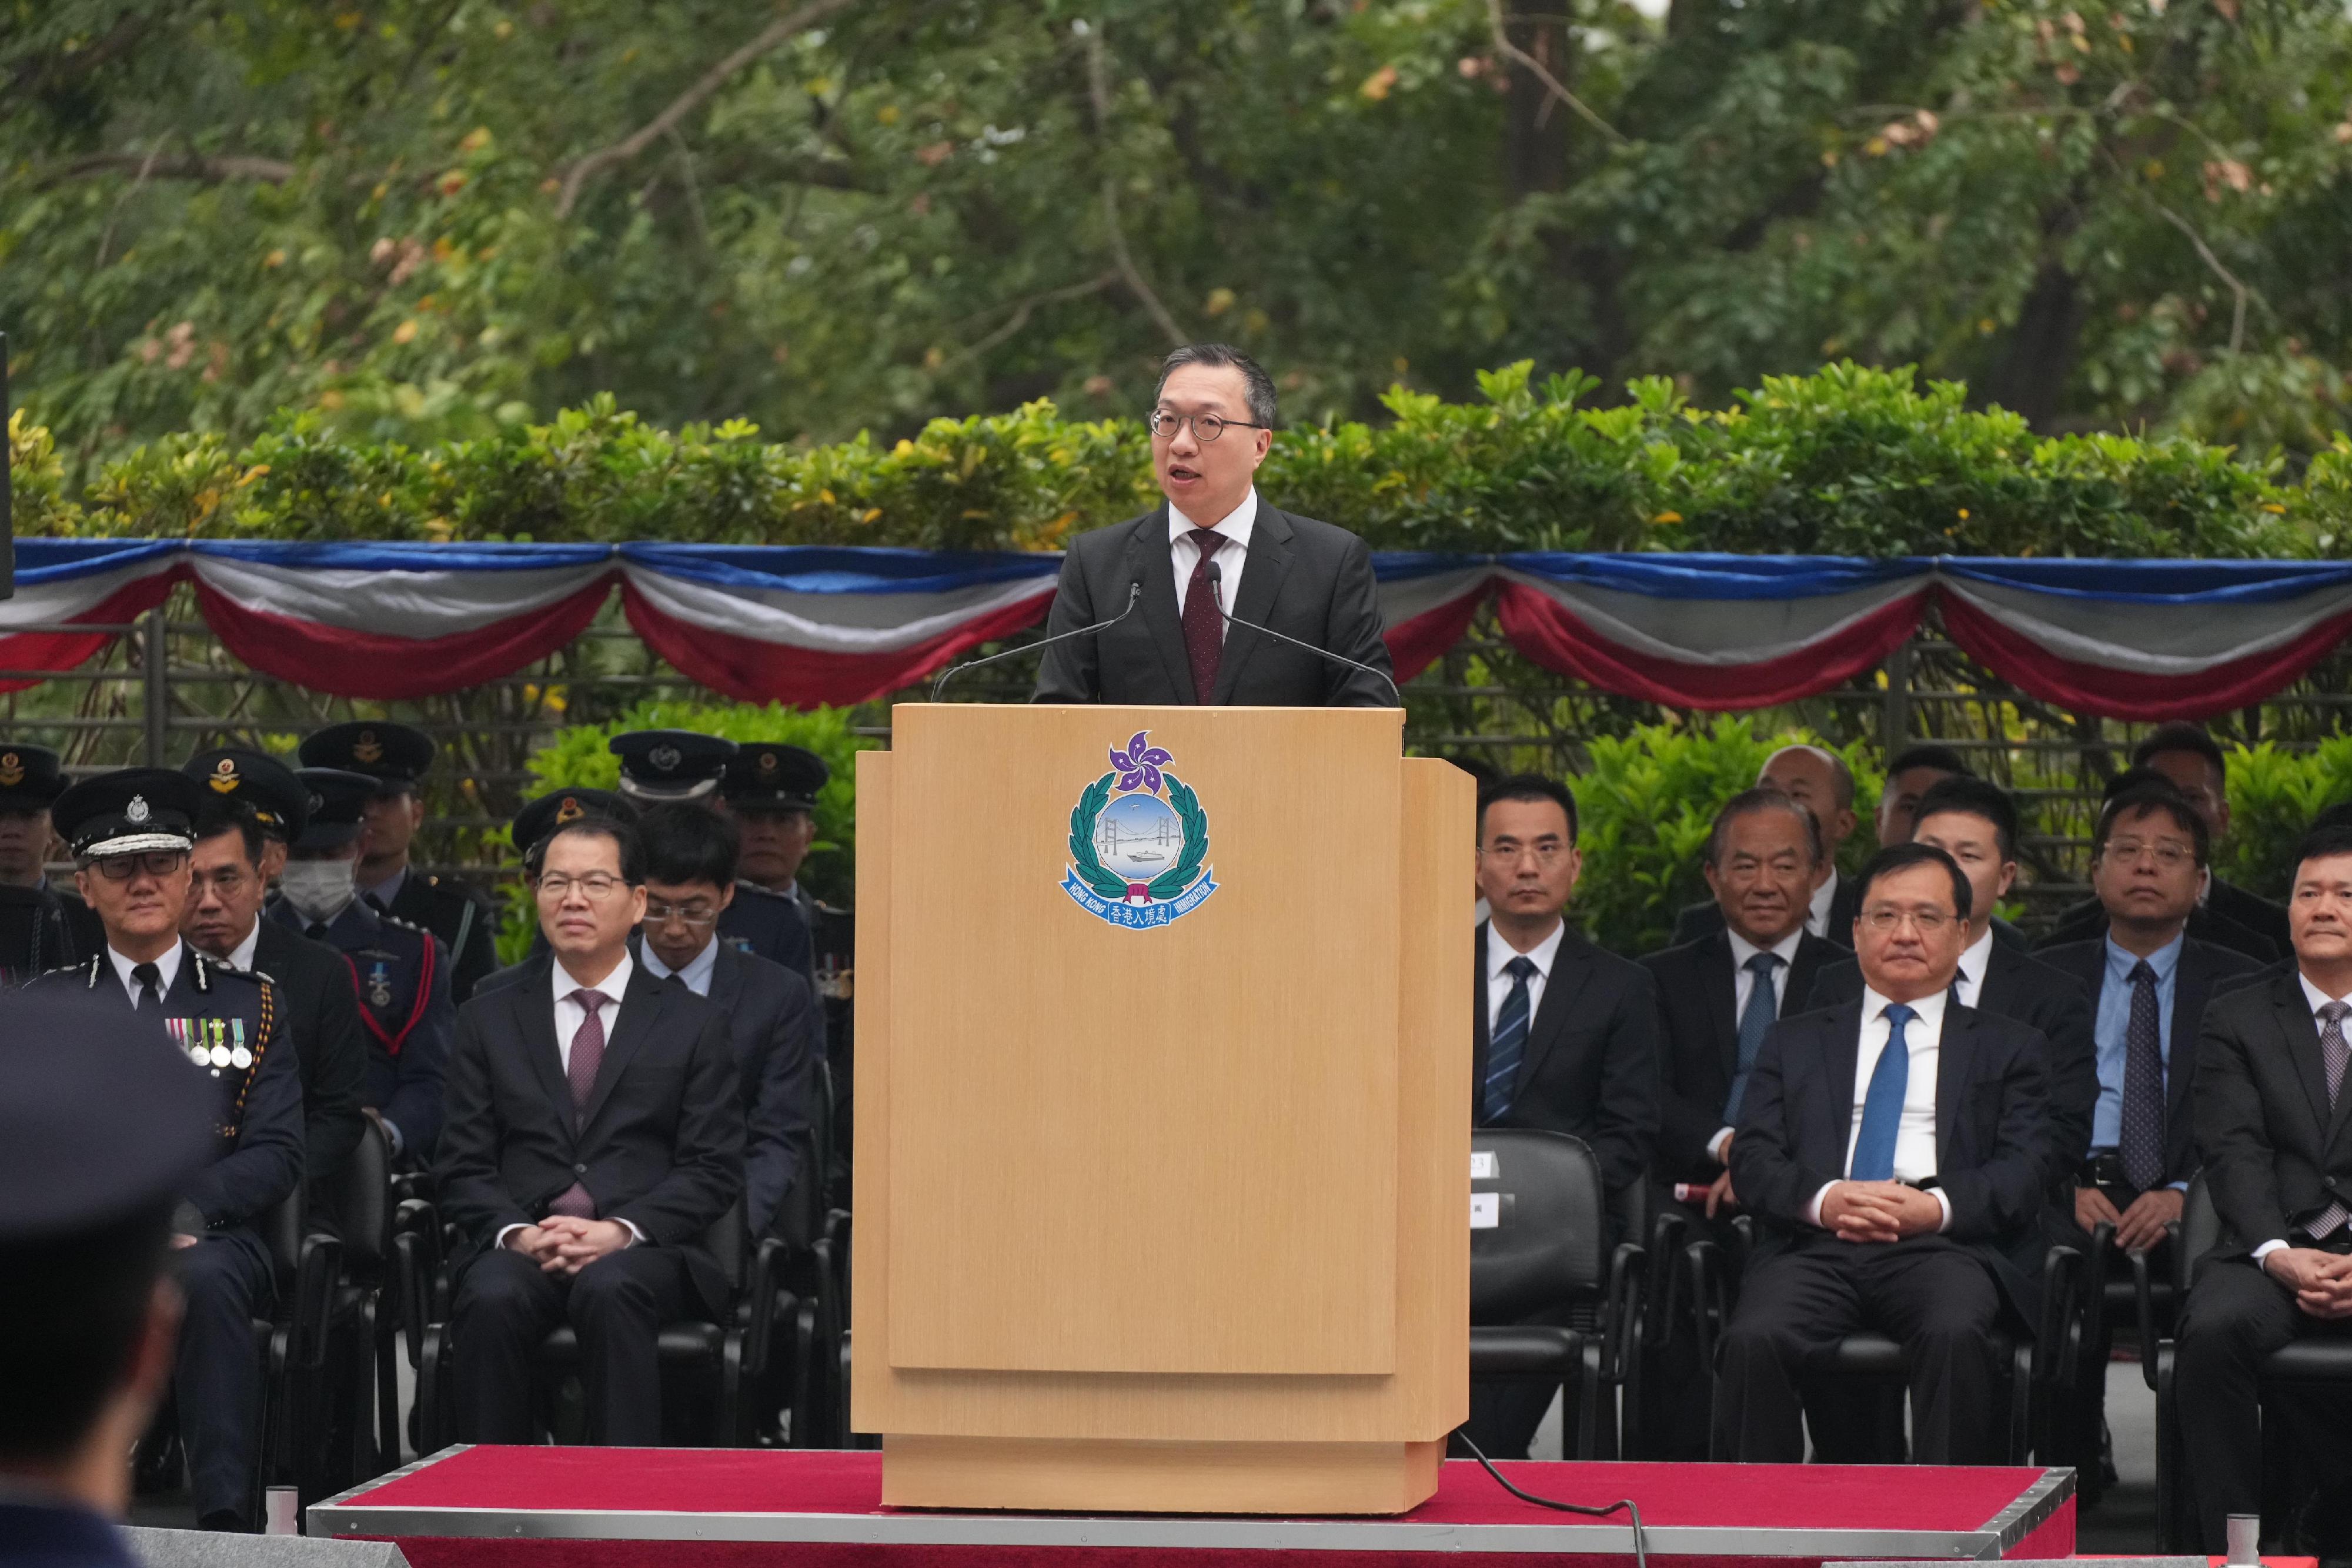 The Security Bureau today (December 4) held the Constitution Day Flag Raising Ceremony. Photo shows the Secretary for Justice, Mr Paul Lam, SC, addressing the flag raising ceremony.